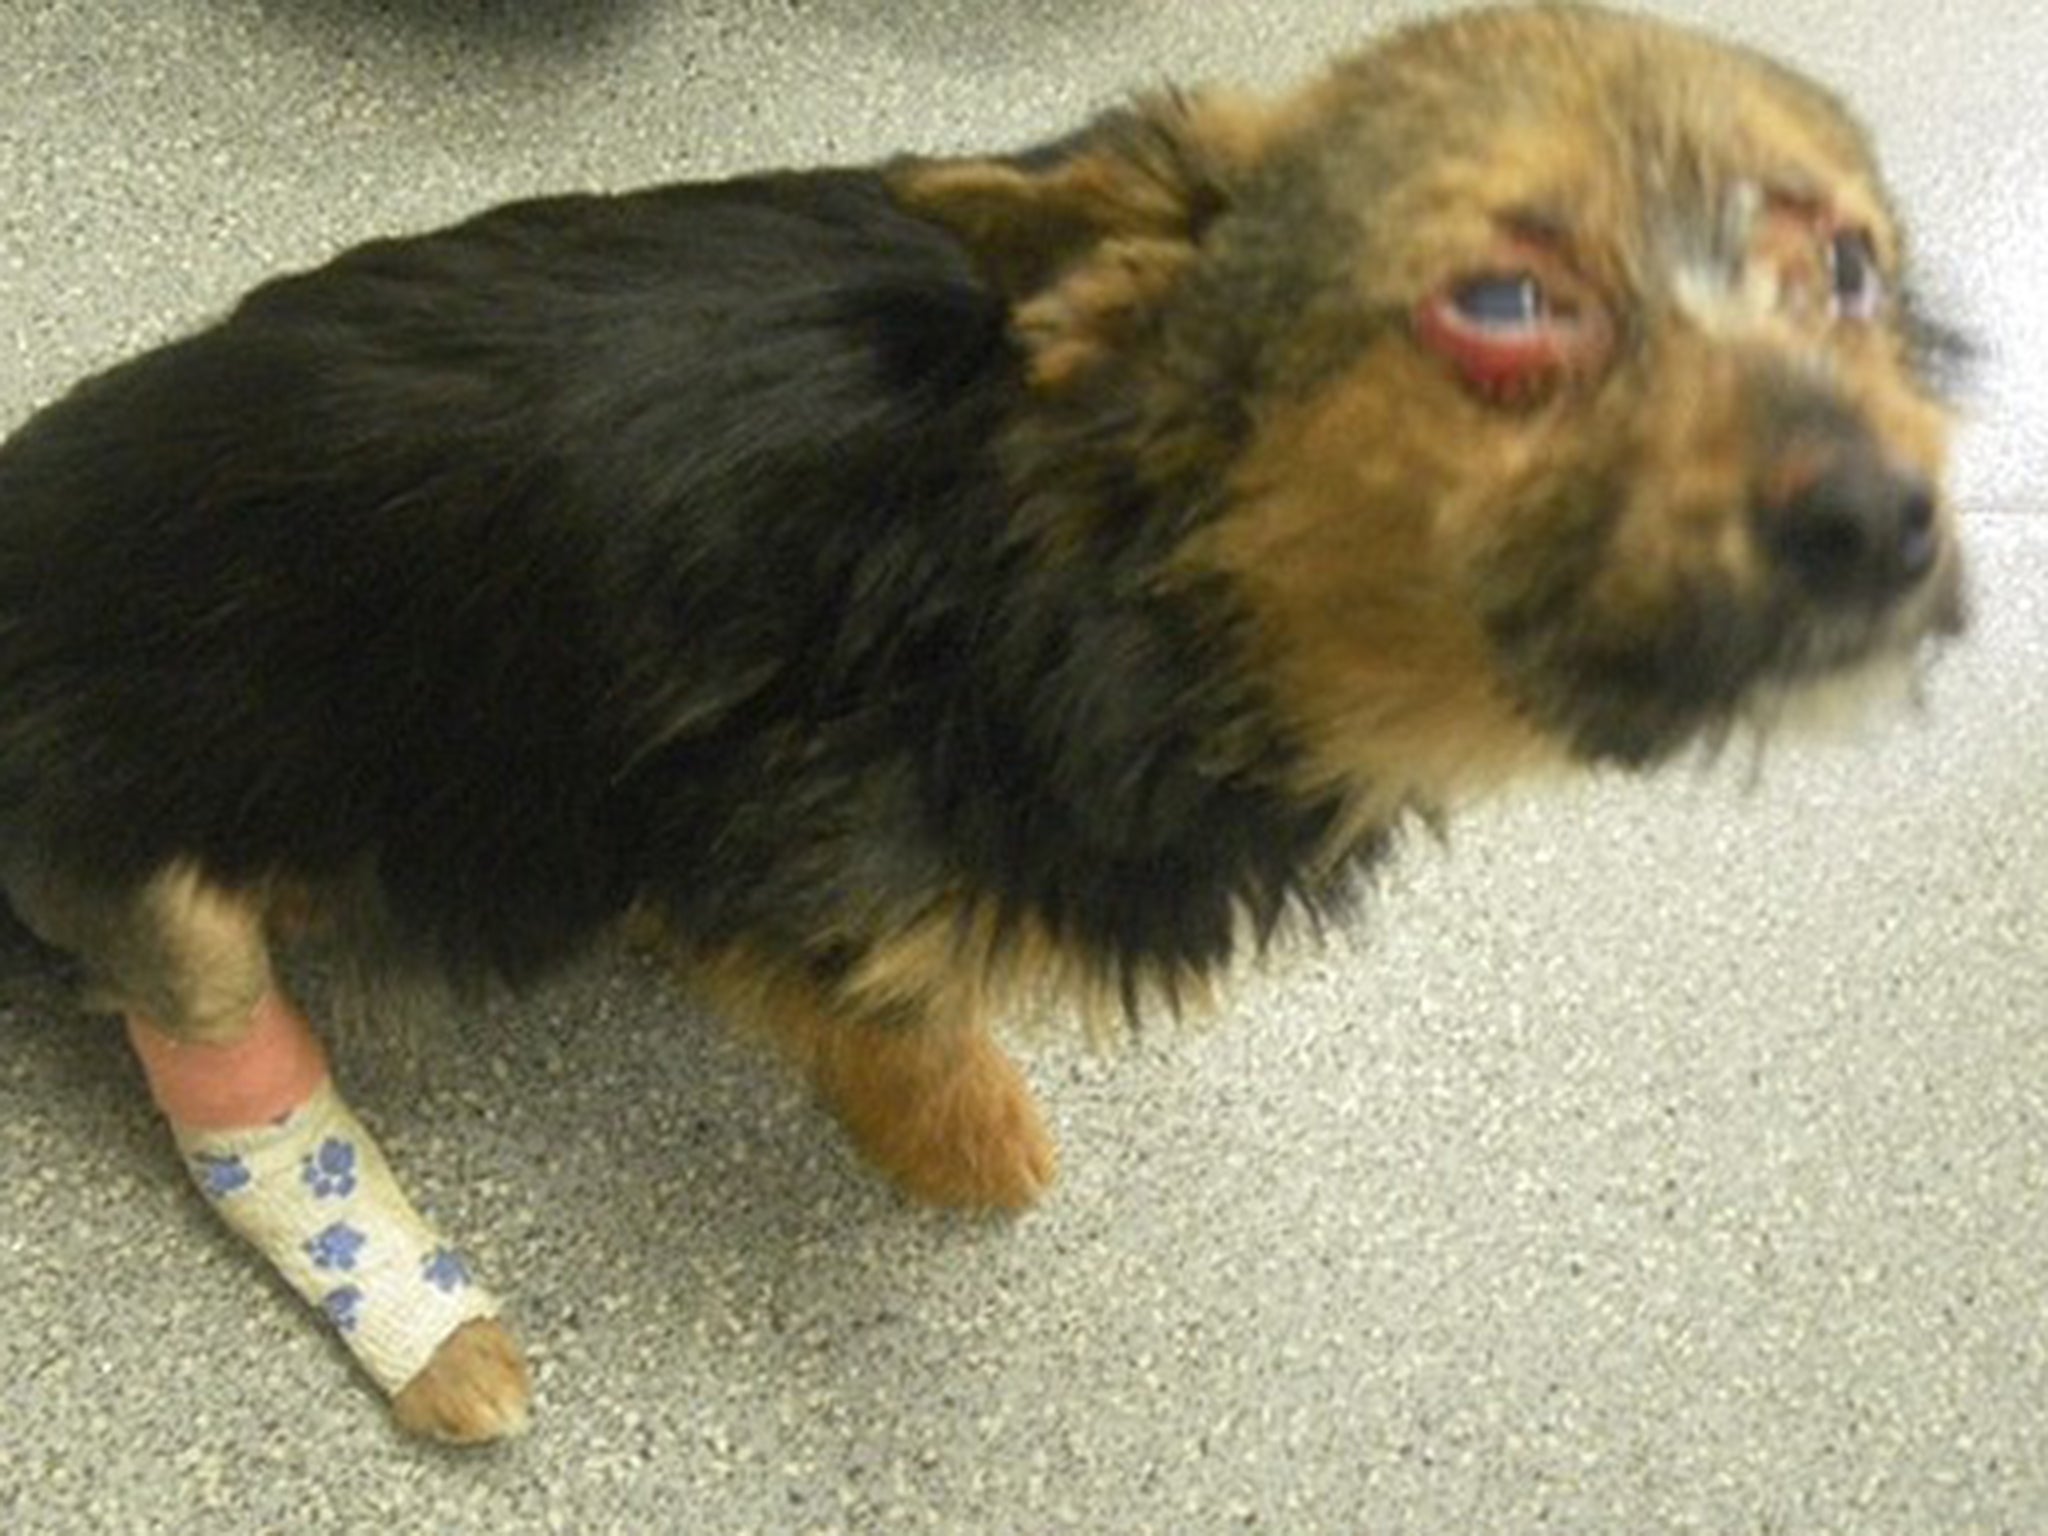 Chunky the dog was beaten and set on fire